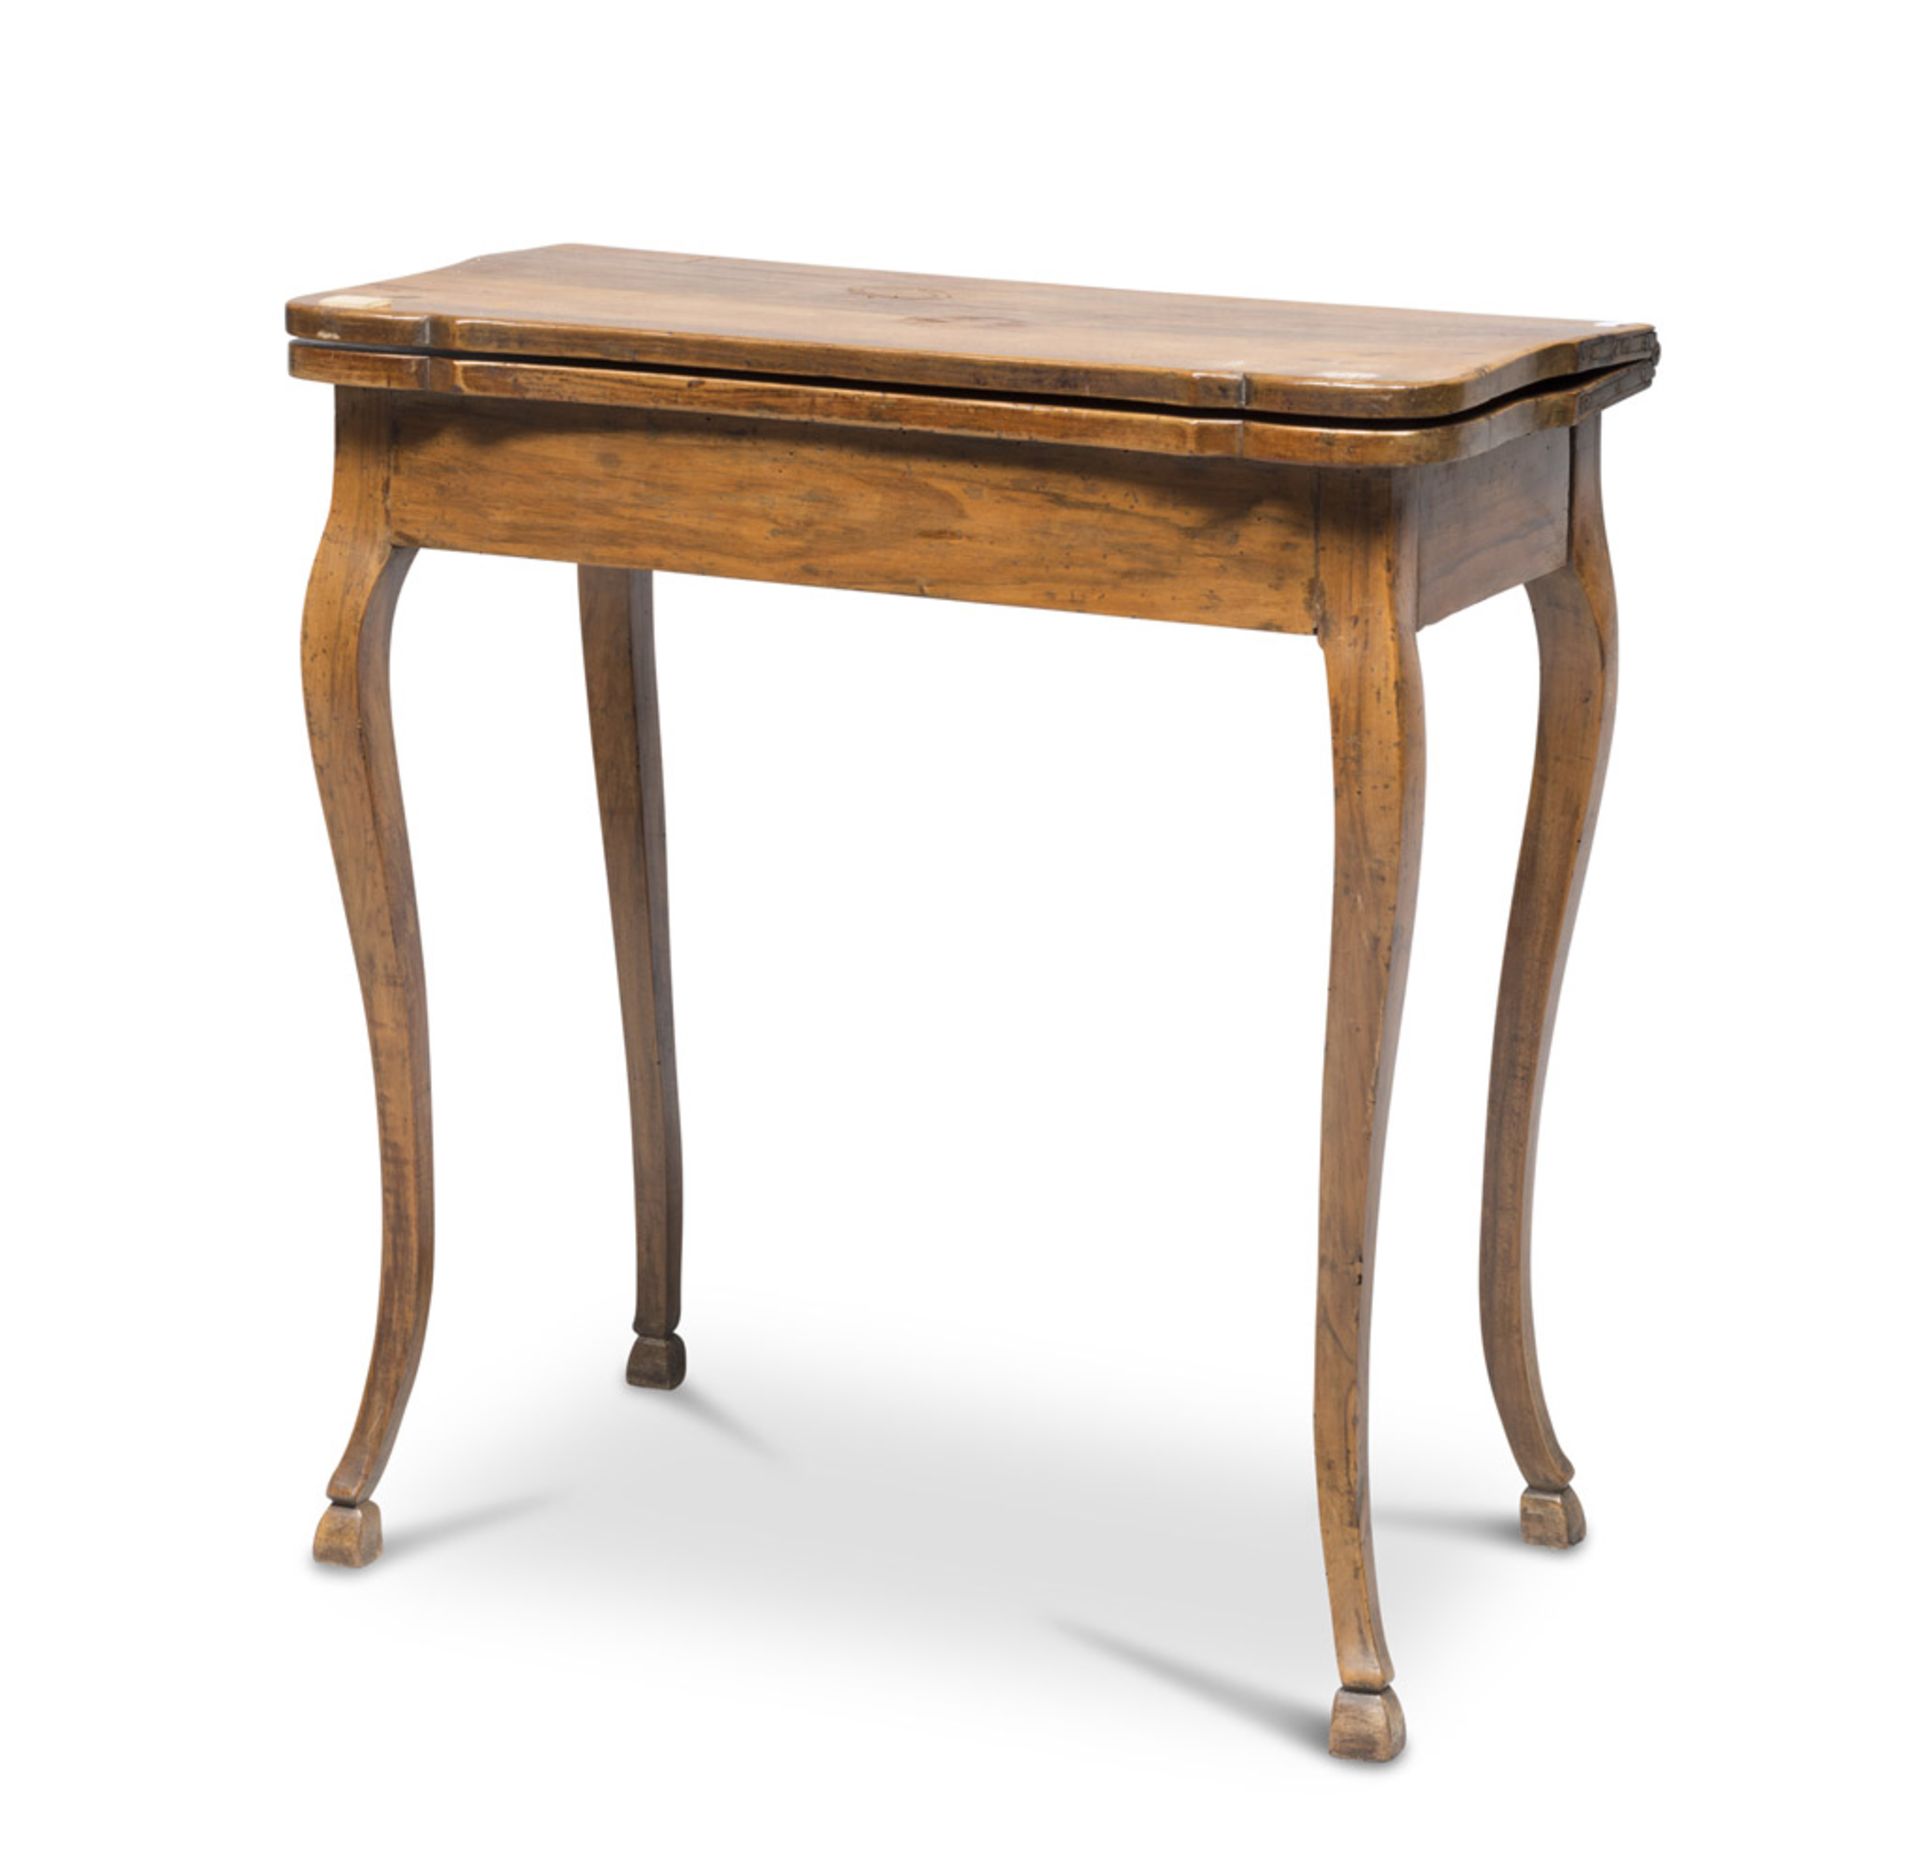 SMALL CARD TABLE IN CHERRY TREE, CENTRAL ITALY LATE 18TH CENTURY with folding top and arched legs